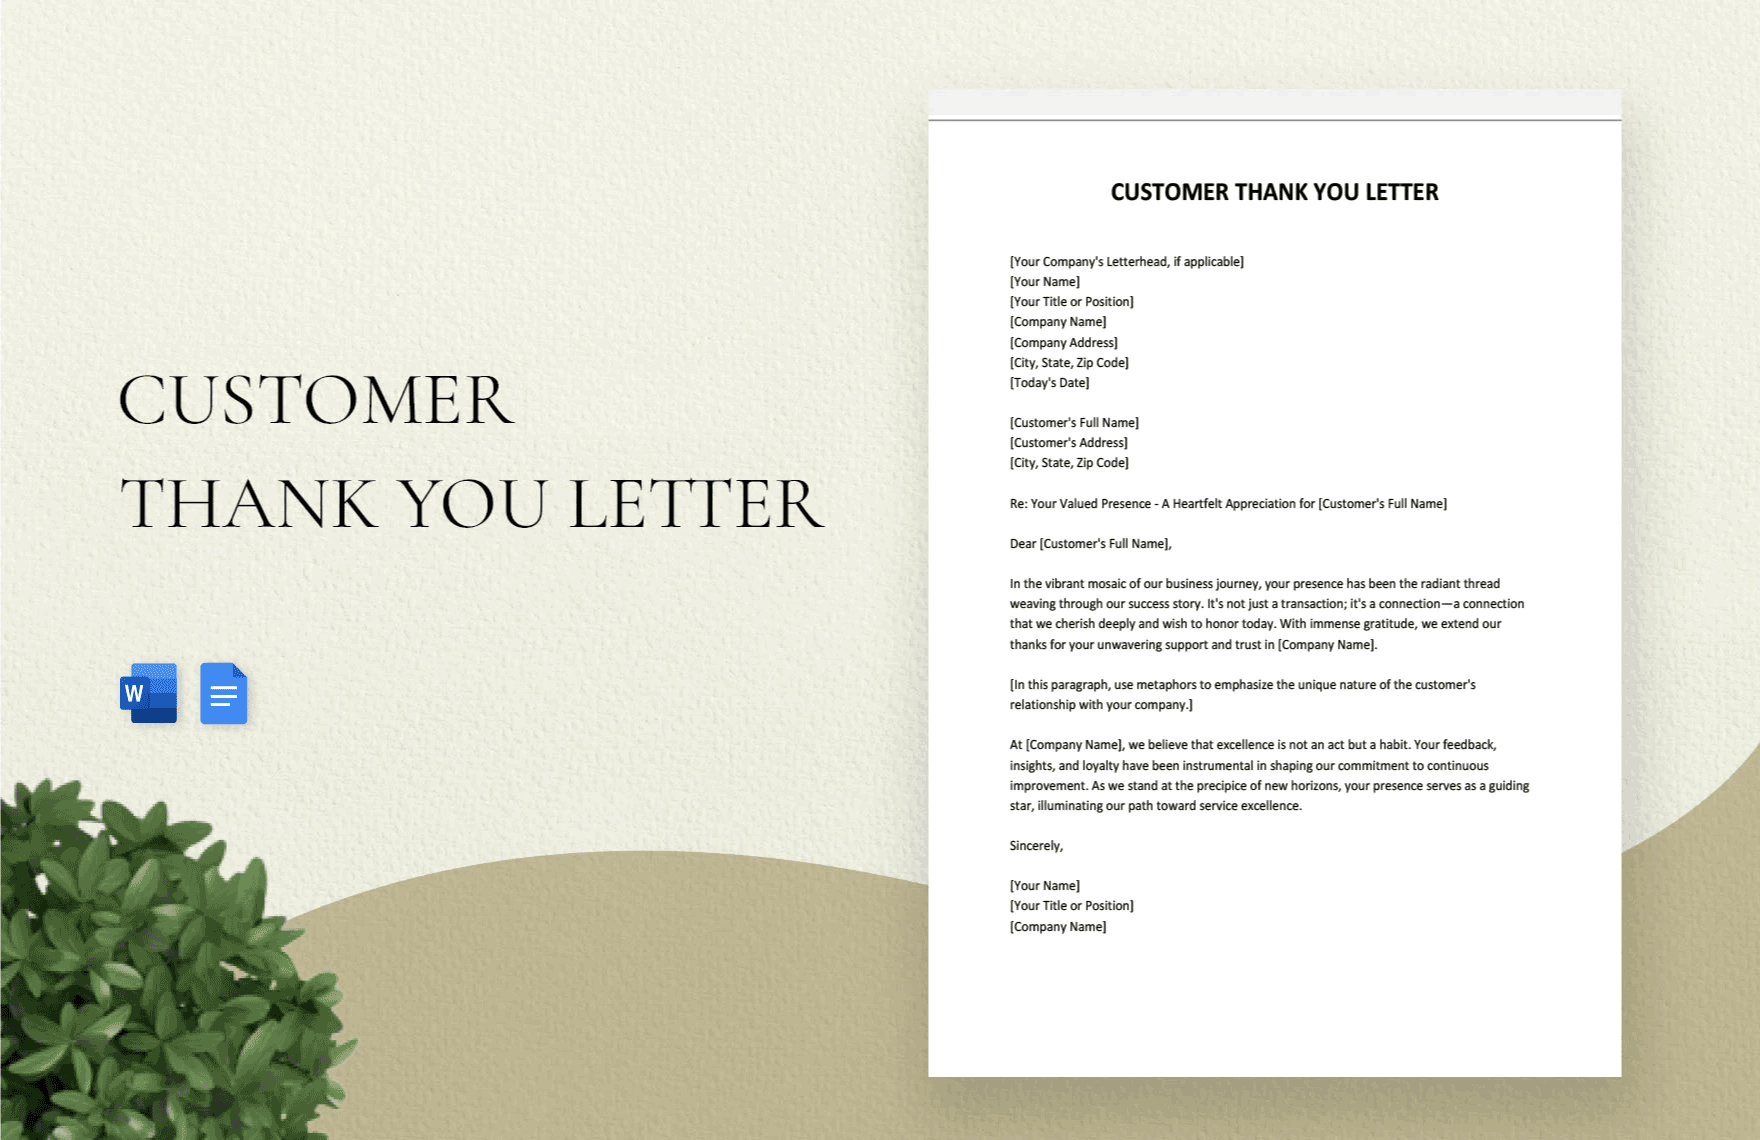 Customer Thank You Letter